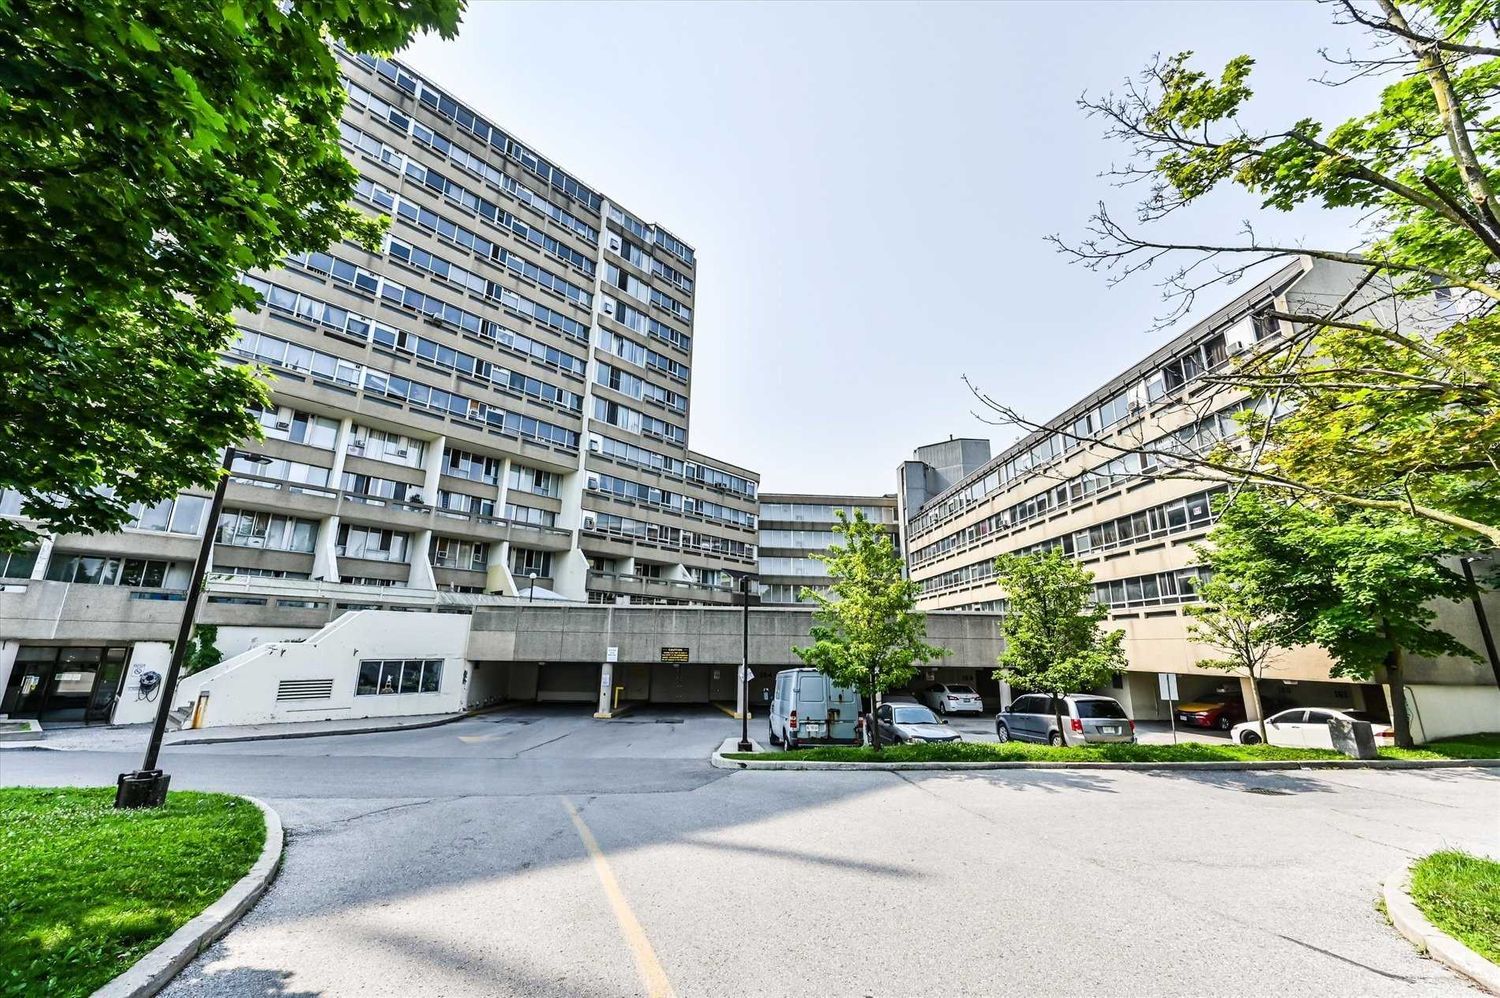 5580 Sheppard Avenue E. Sheppard Place Condominium is located in  Scarborough, Toronto - image #2 of 2